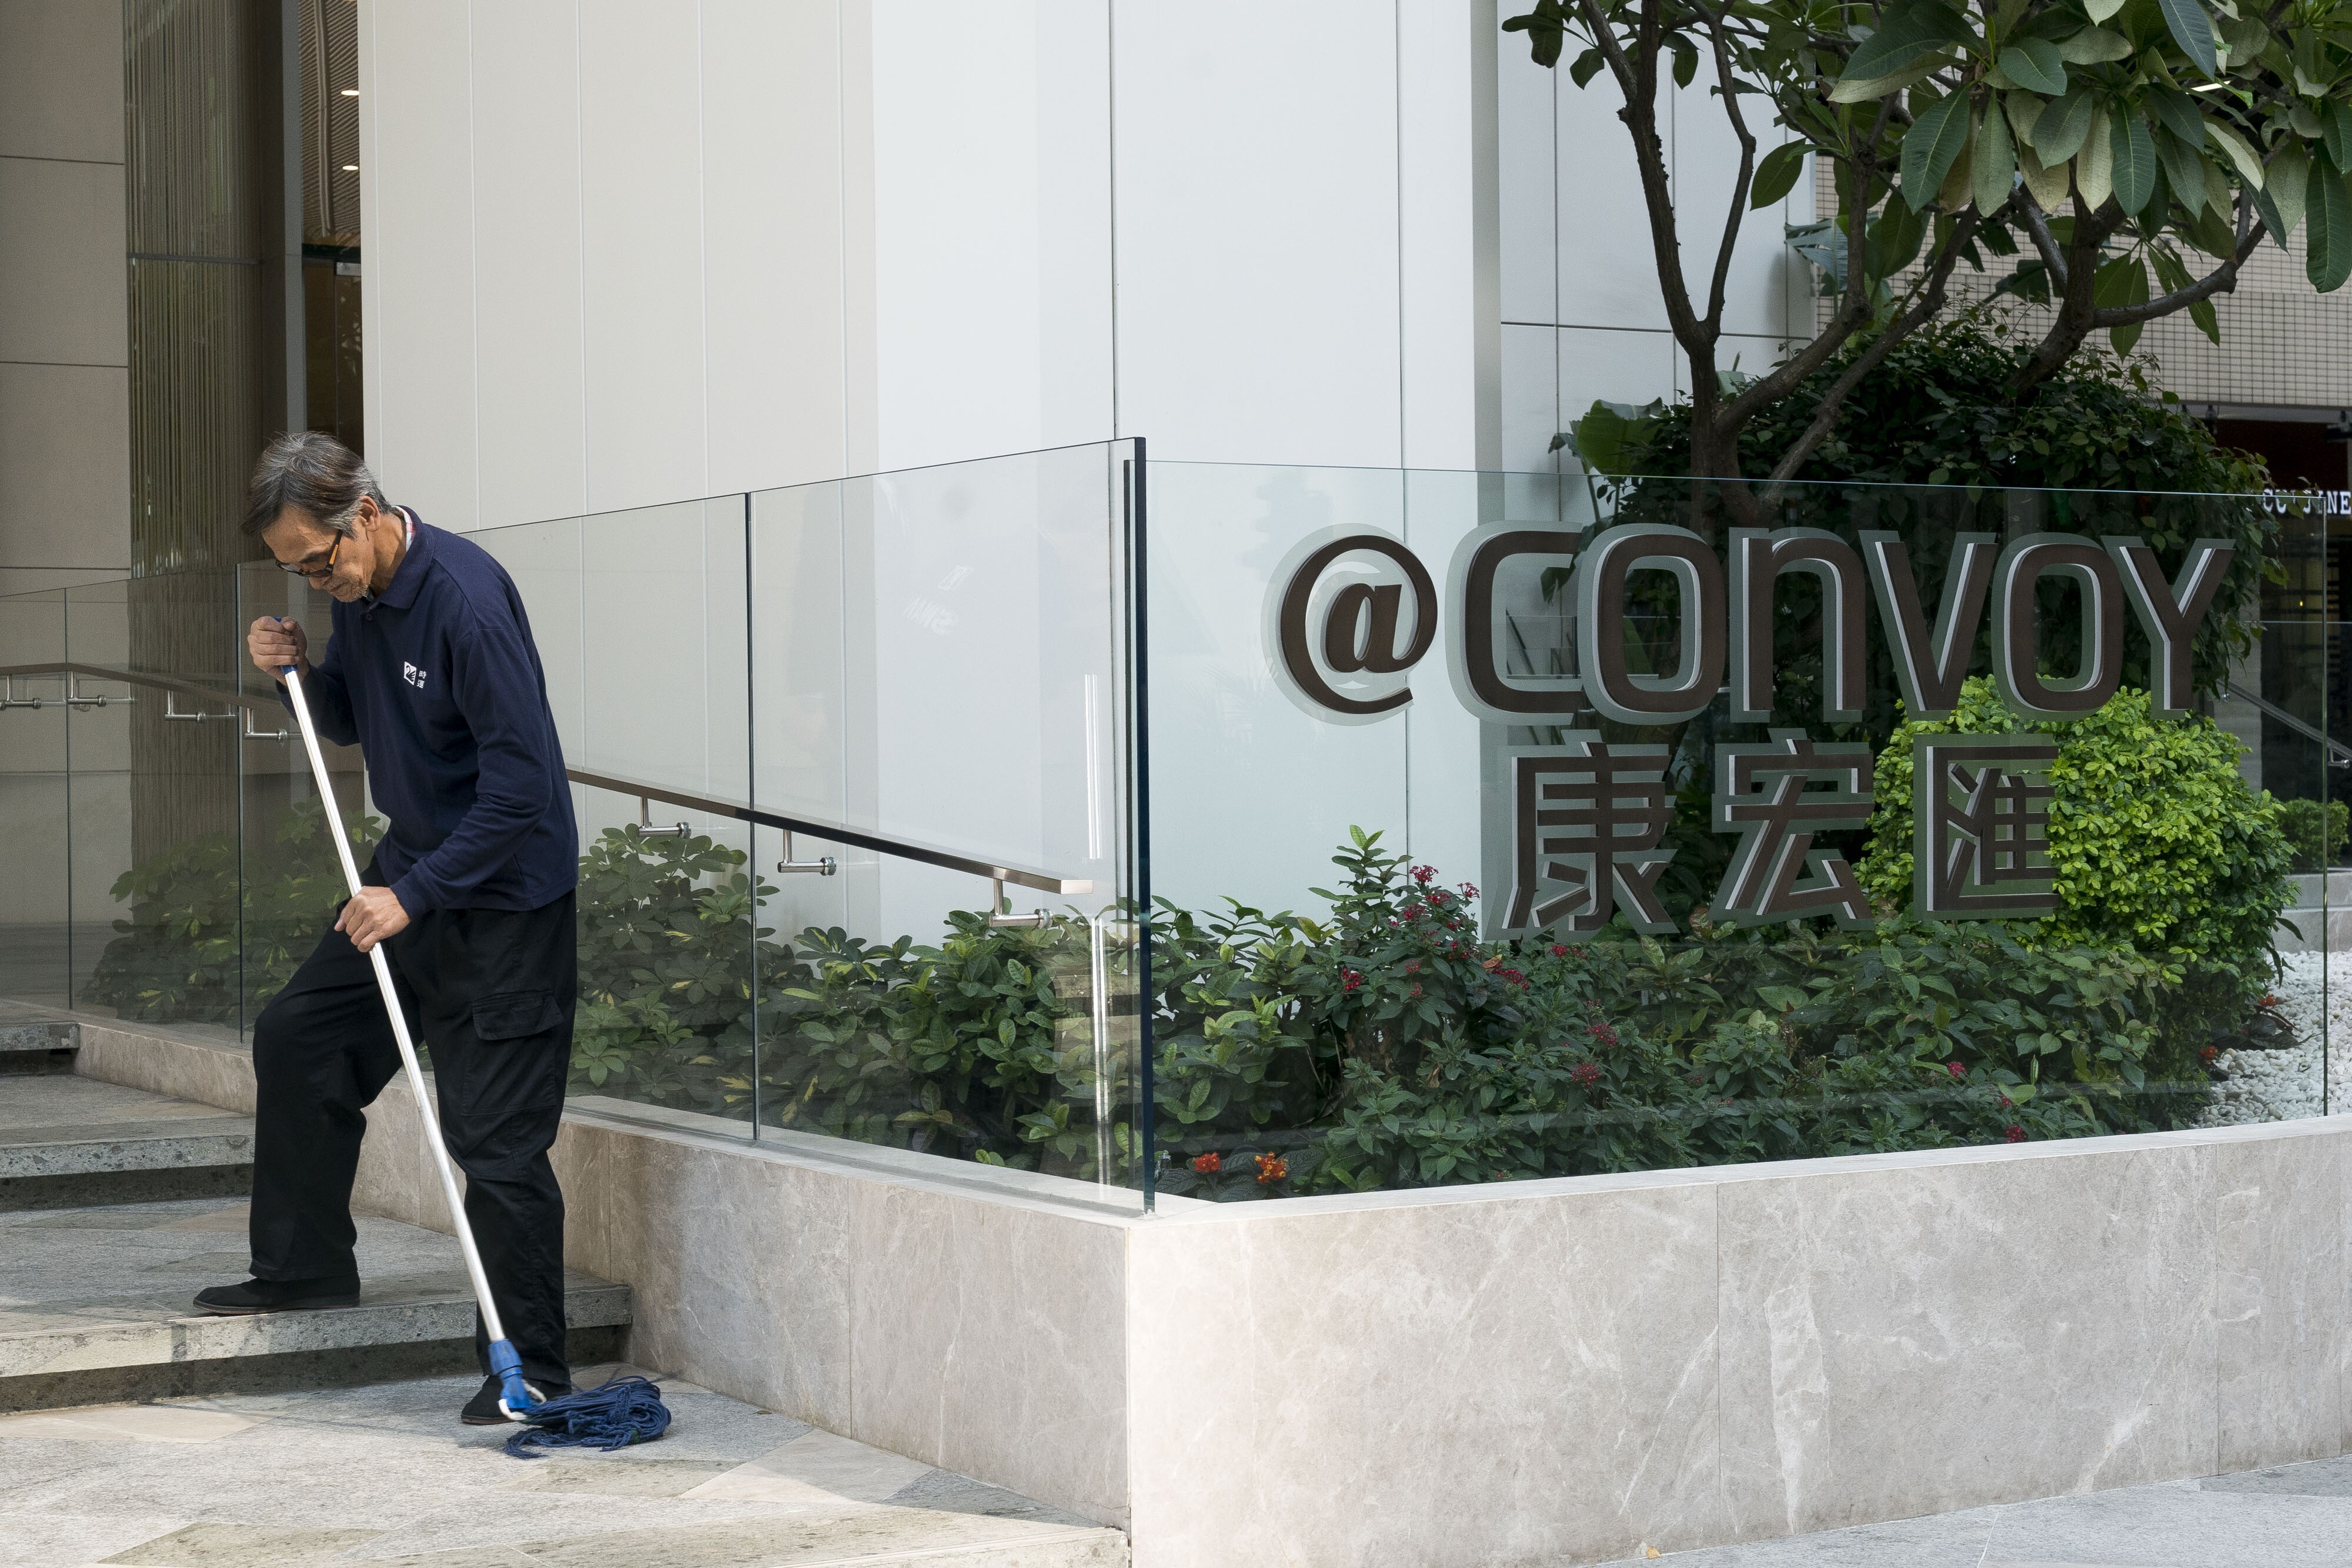 The "@Convoy" building which houses the headquarters of Convoy Global Holdings in Hong Kong in December 2017. Photo: Bloomberg